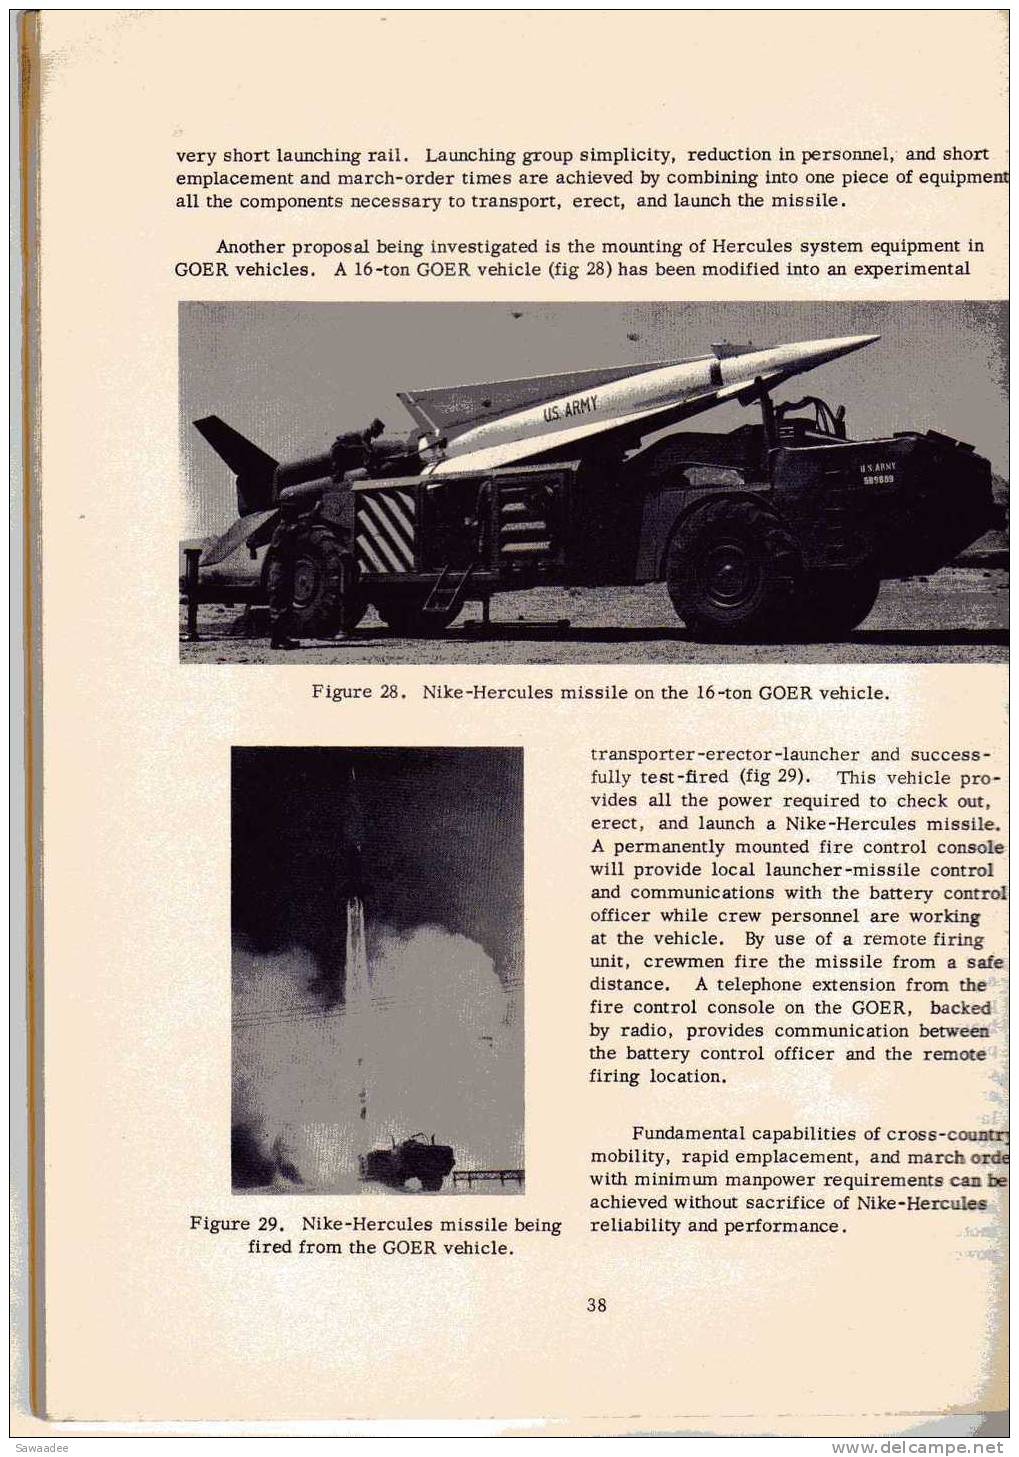 DOCUMENT - MILITARIA  - U.S. ARMY AIR DEFENSE -  FORT BLISS - TEXAS - 1962/63 - 78 PAGES - NBRES ILLUSTRATIONS, PHOTOS - Wars Involving US